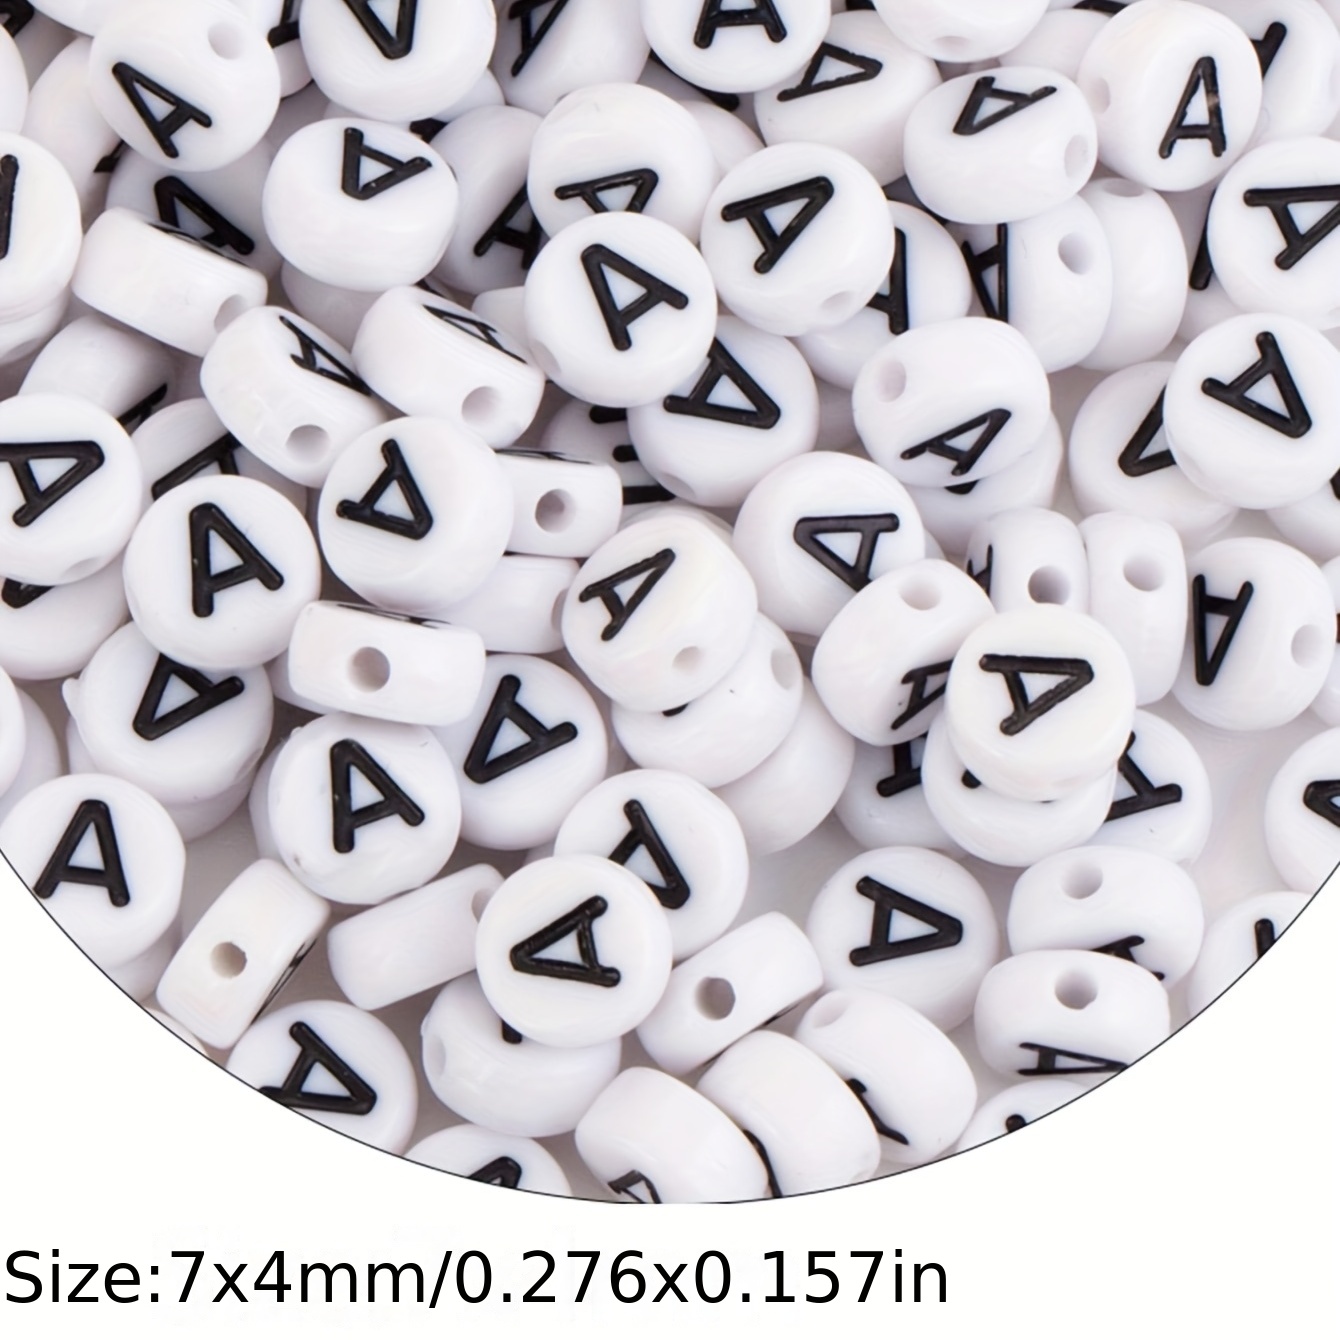 Bxwoum 100pcs Letter Beads White Round Acrylic Alphabet Beads Letter D Beads for Jewelry Making Bracelets Necklaces Key Chains DIY 4x7mm